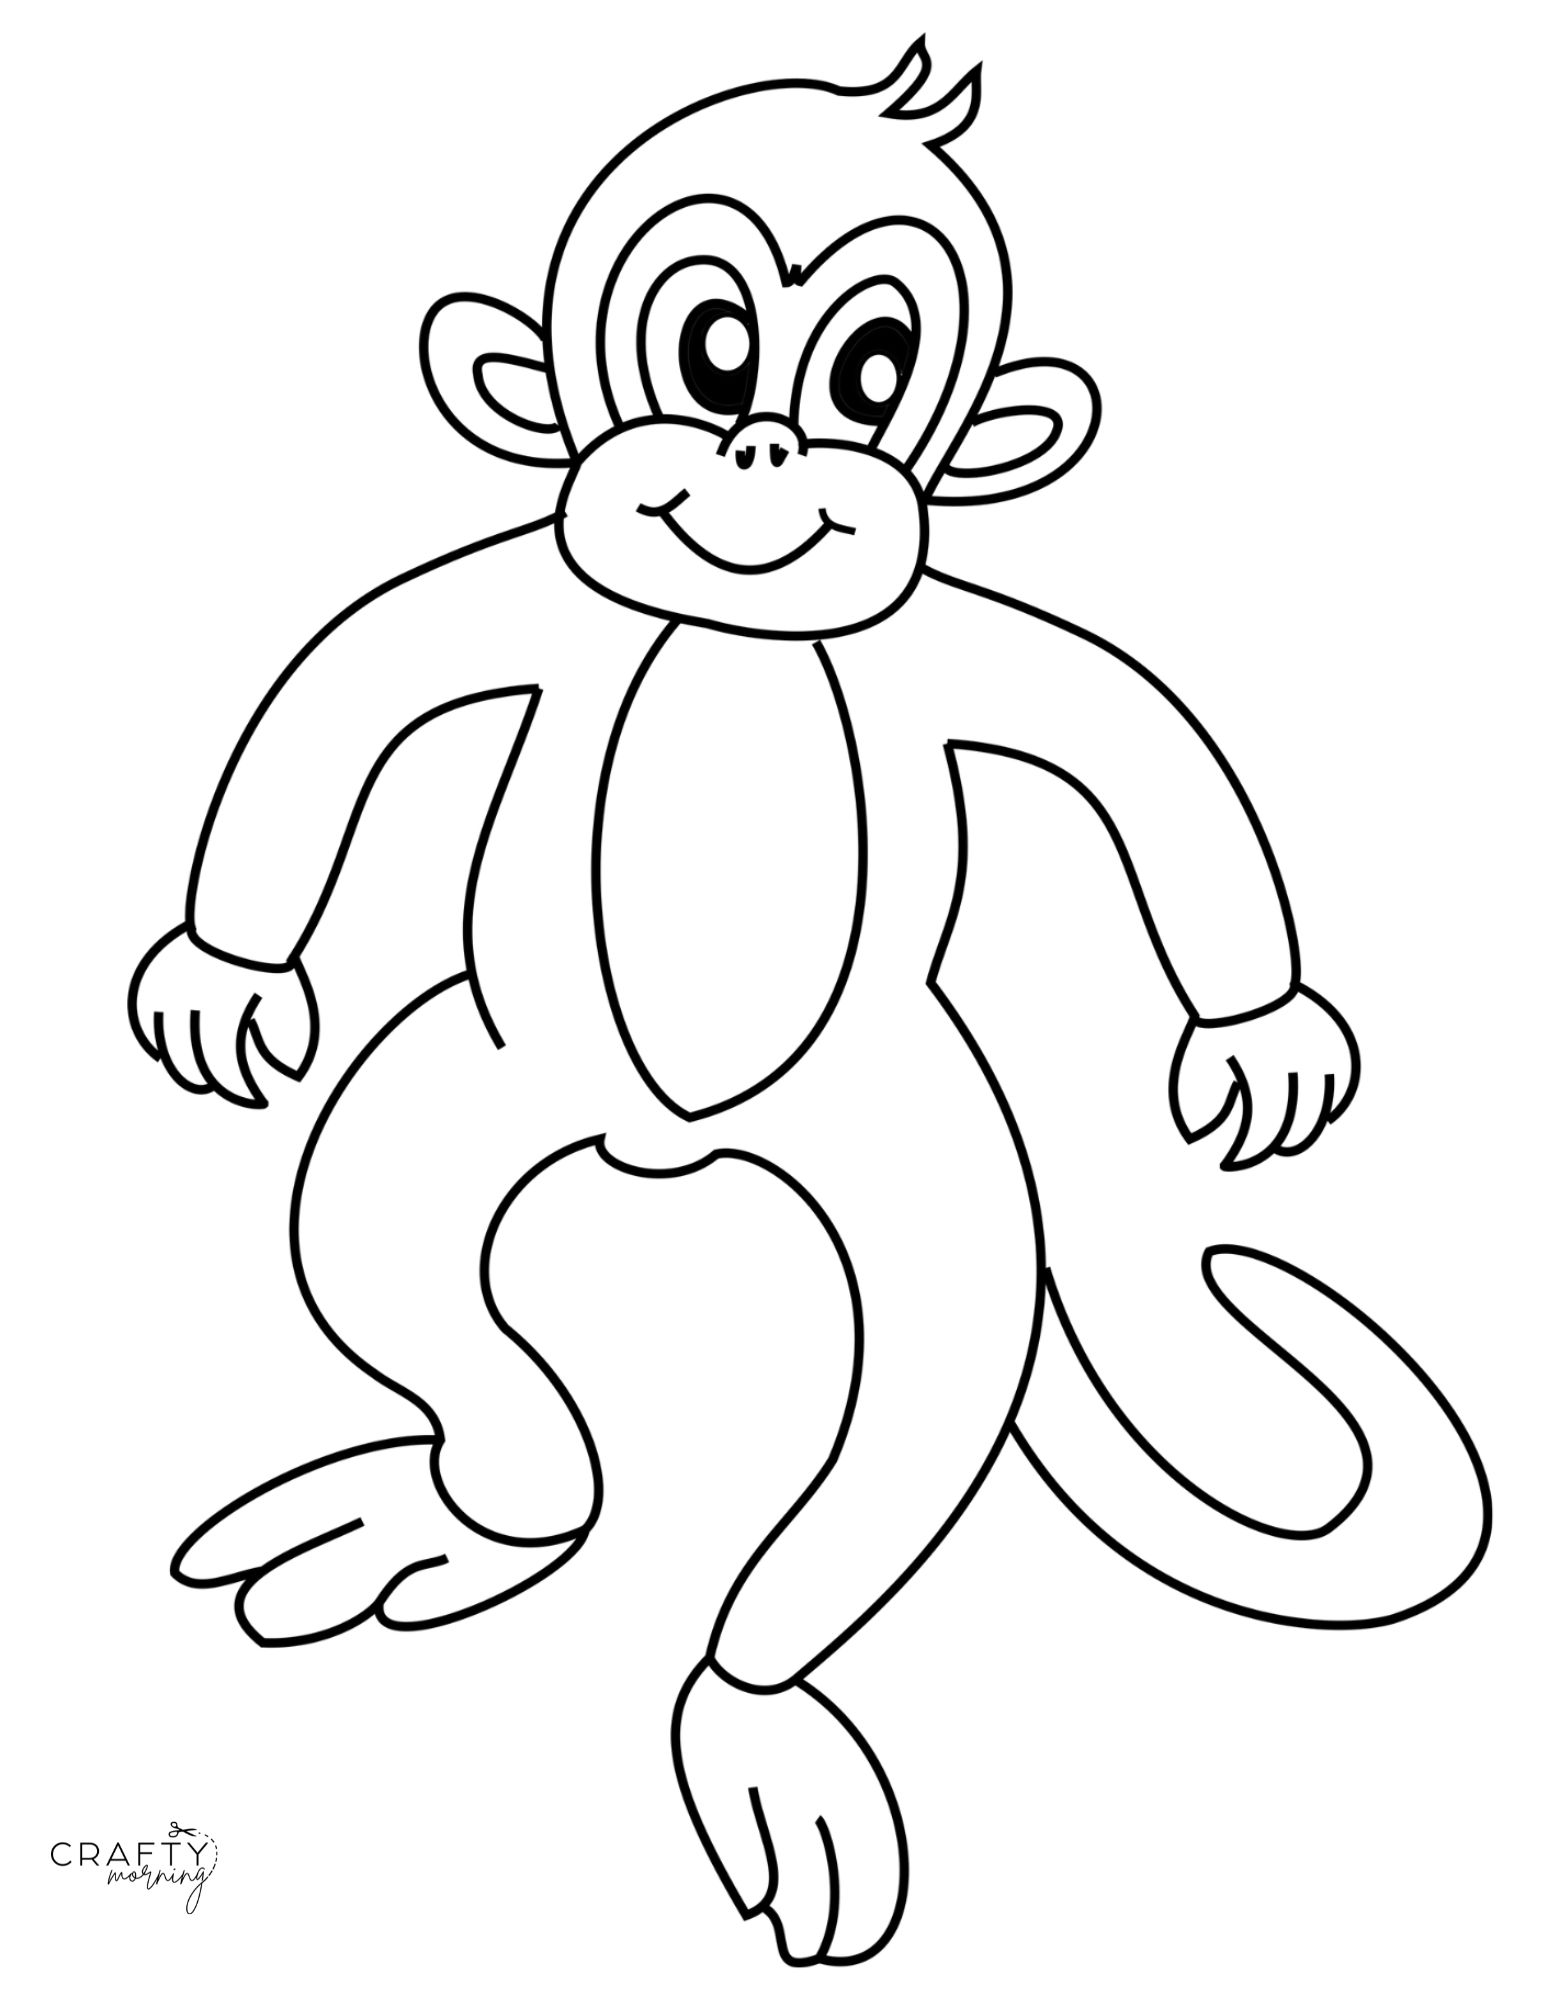 How to Draw a Realistic Monkey, Draw Real Monkey, Step by Step, Realistic,  Drawing Technique, FREE Online… | Monkey drawing, Realistic drawings, Monkey  drawing easy